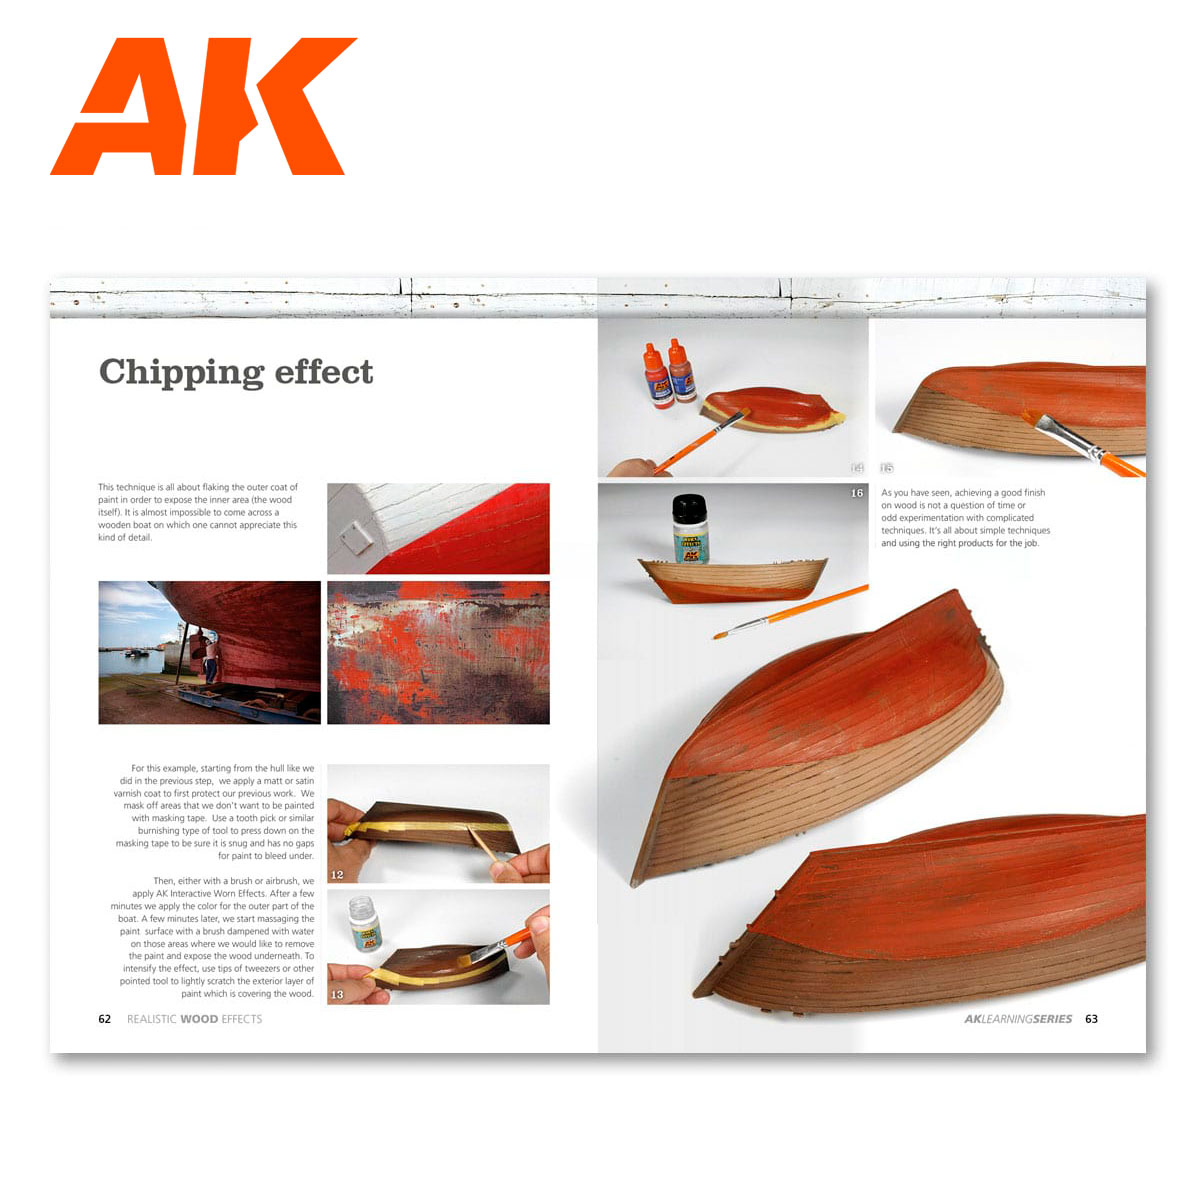 AK Learning Series: 01 - Realistic Wood Effects 